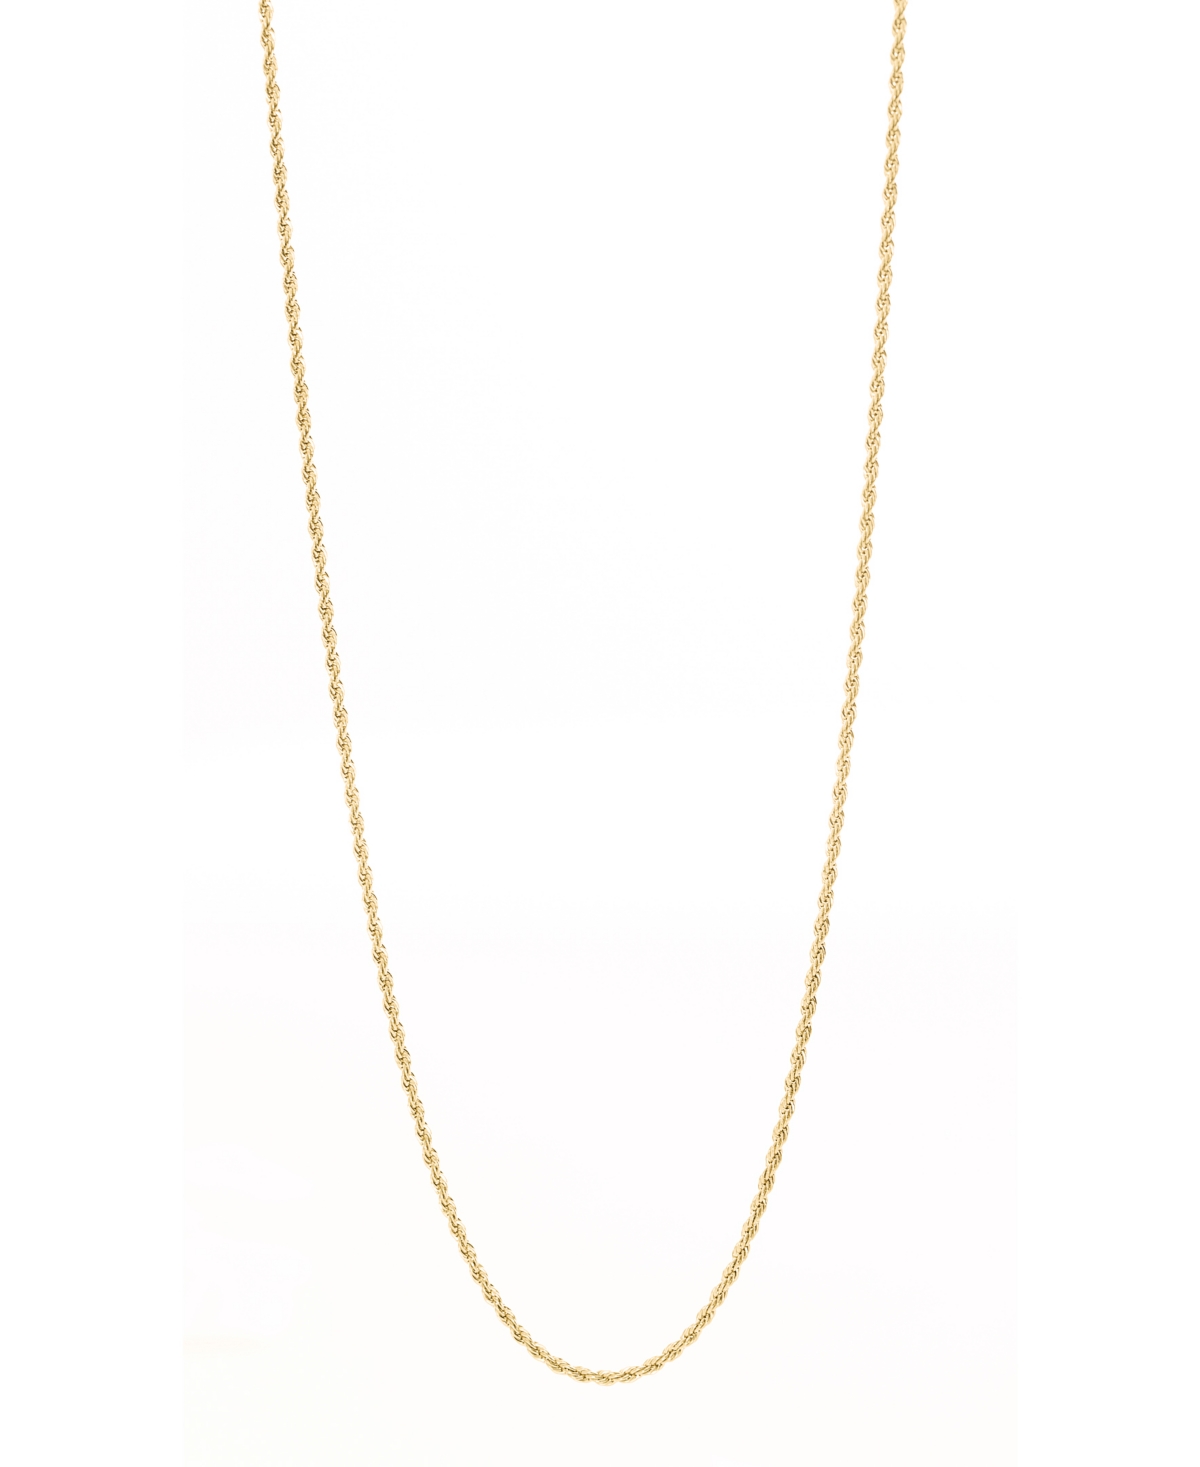 Eve's Jewelry Men's Gold Plated Rope Chain in Stainless Steel Necklace